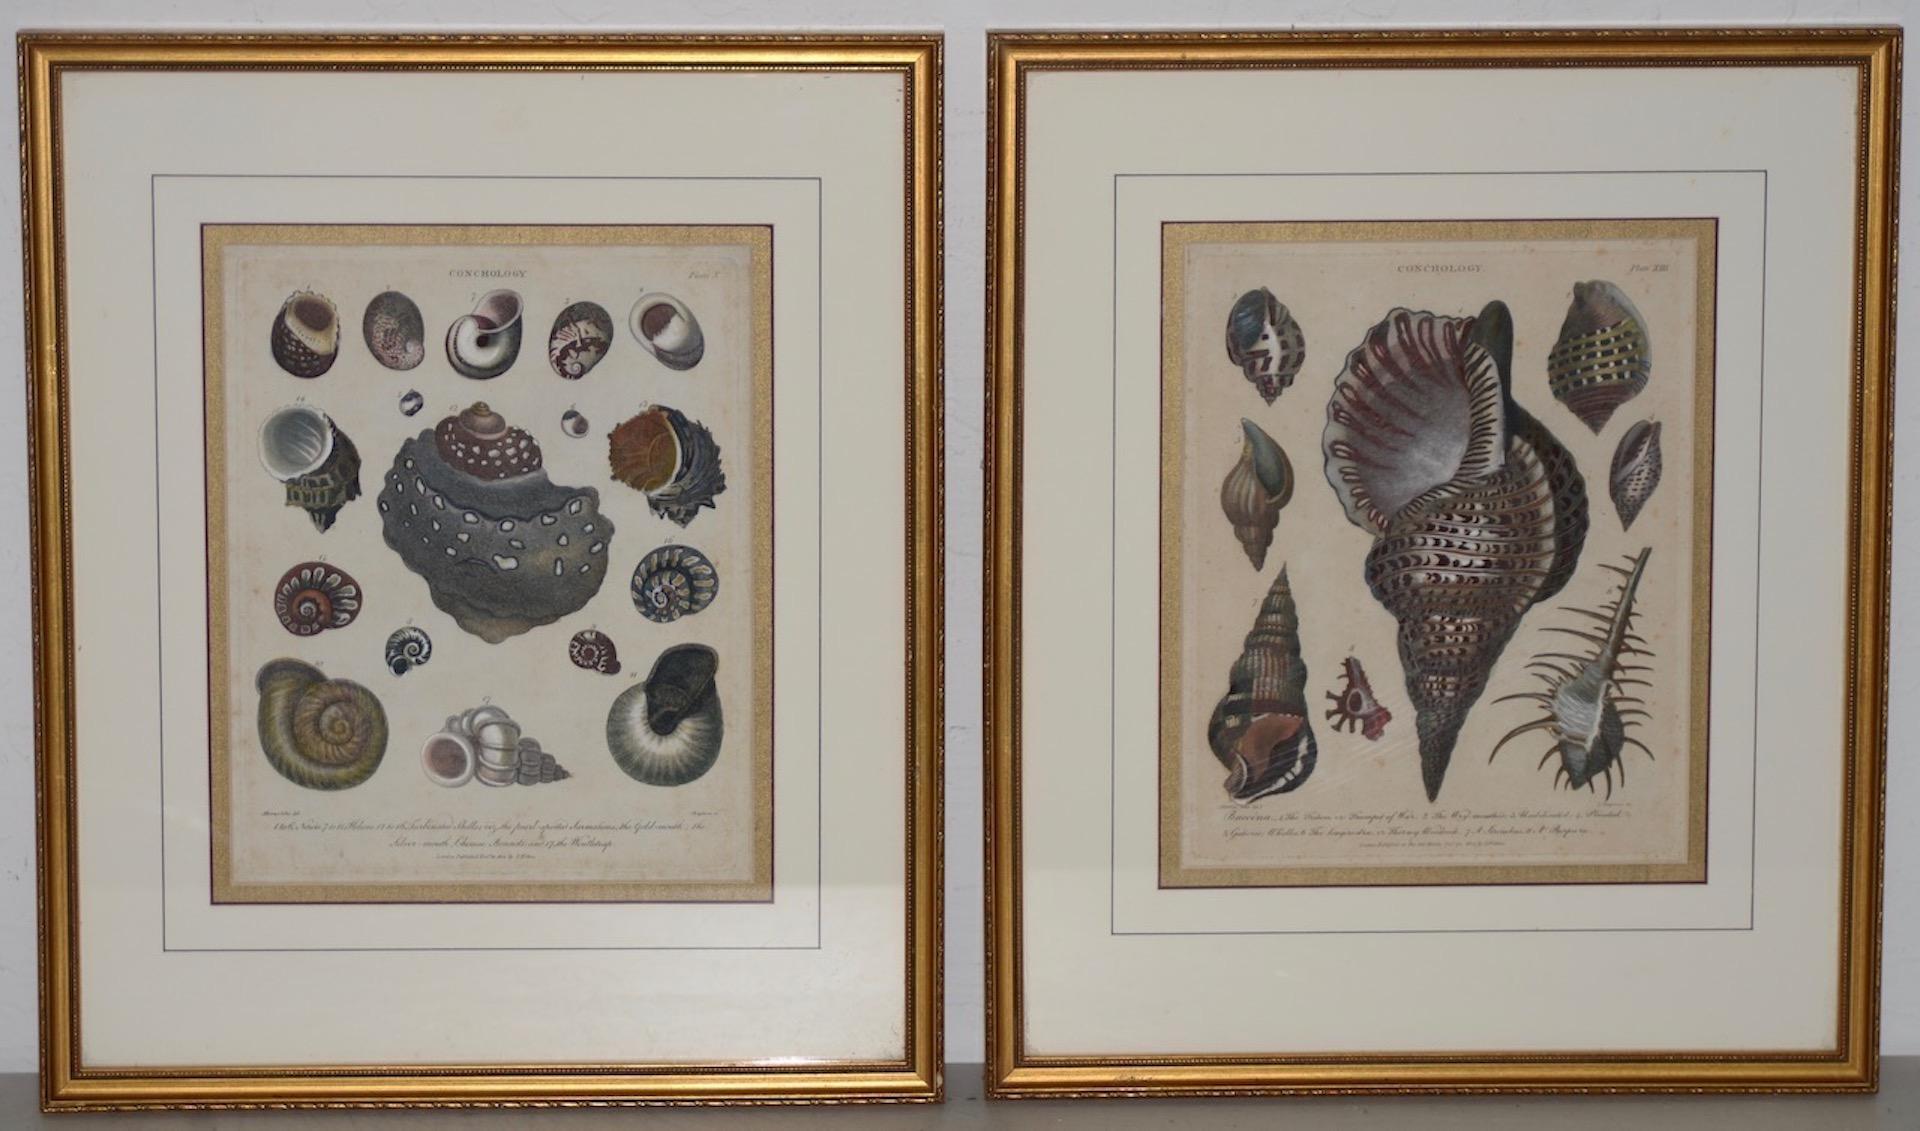 Pair of Early 19th Century "Conchology" Conch Shells Color Etchings c.1802